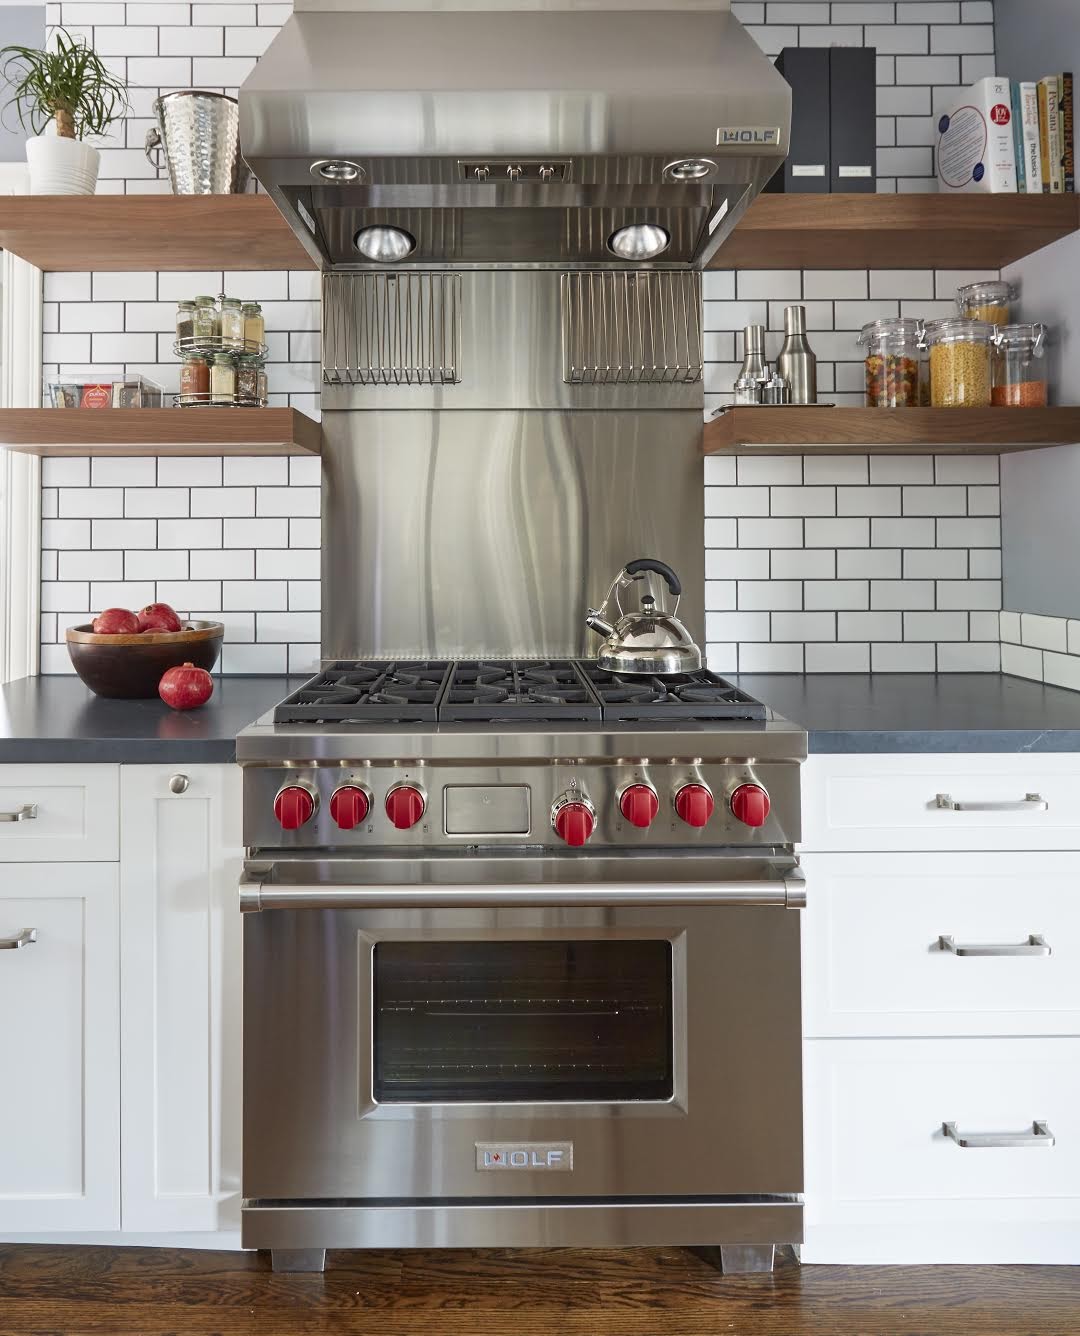 Hound At understrege hierarki The Top High-End Appliance Brands for Your Upscale Kitchen Remodel